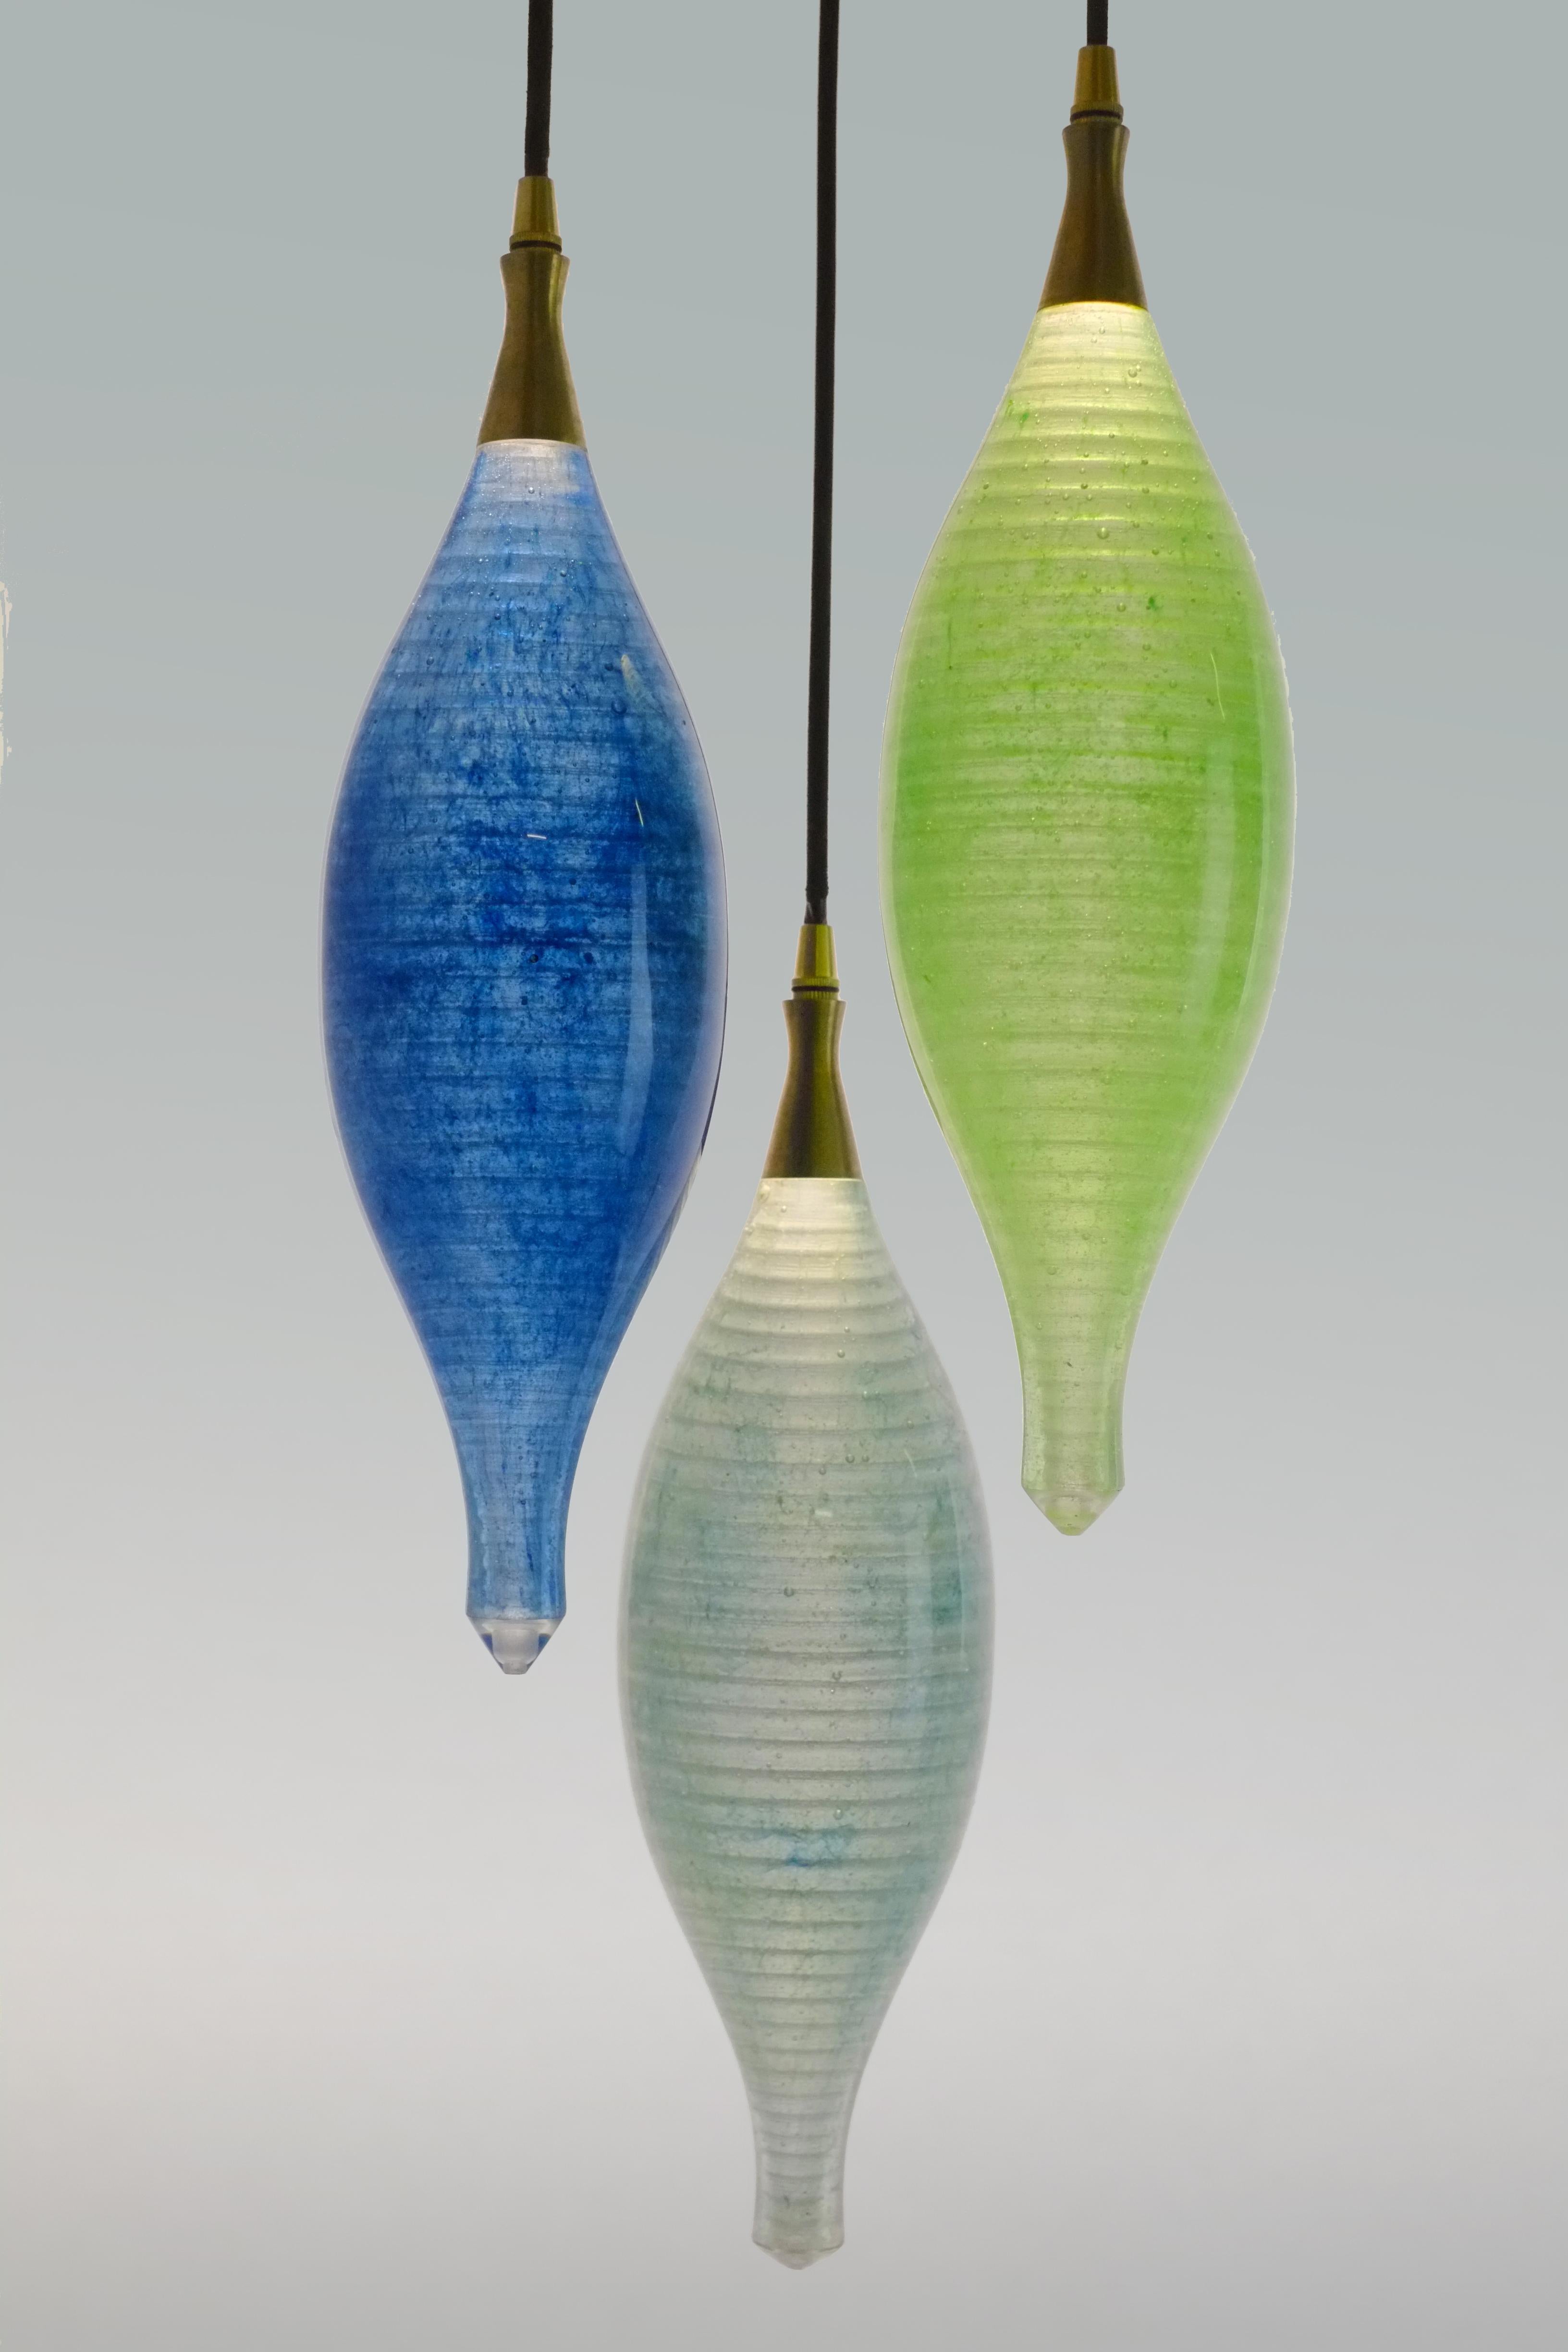 Cast Contemporary Glass Lamp: Semazen Crystal Hanging Pendant Light Citron Green For Sale